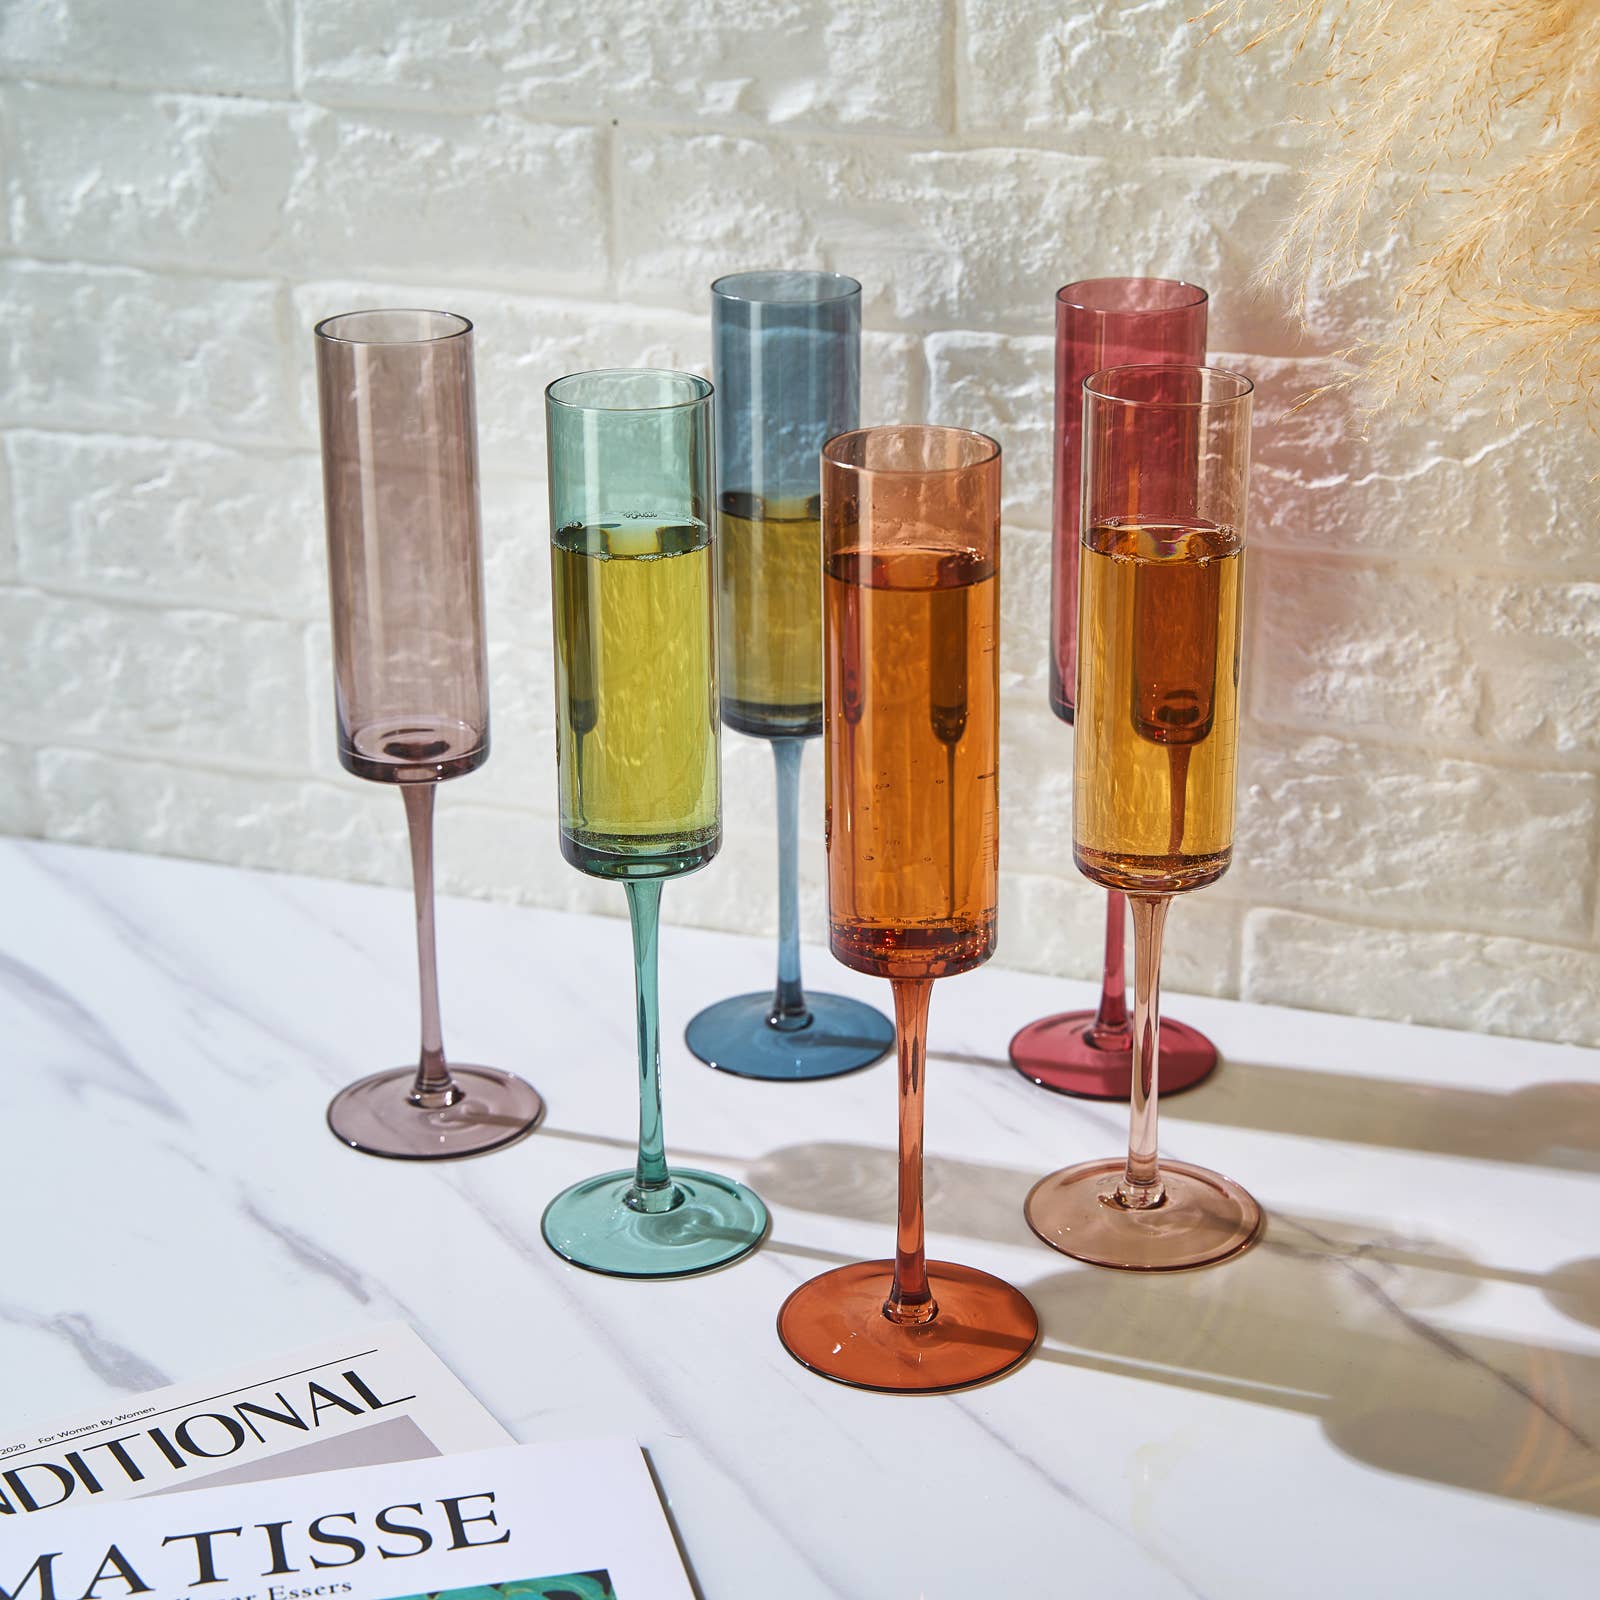 Muted Rainbow Champagne - Set of 6